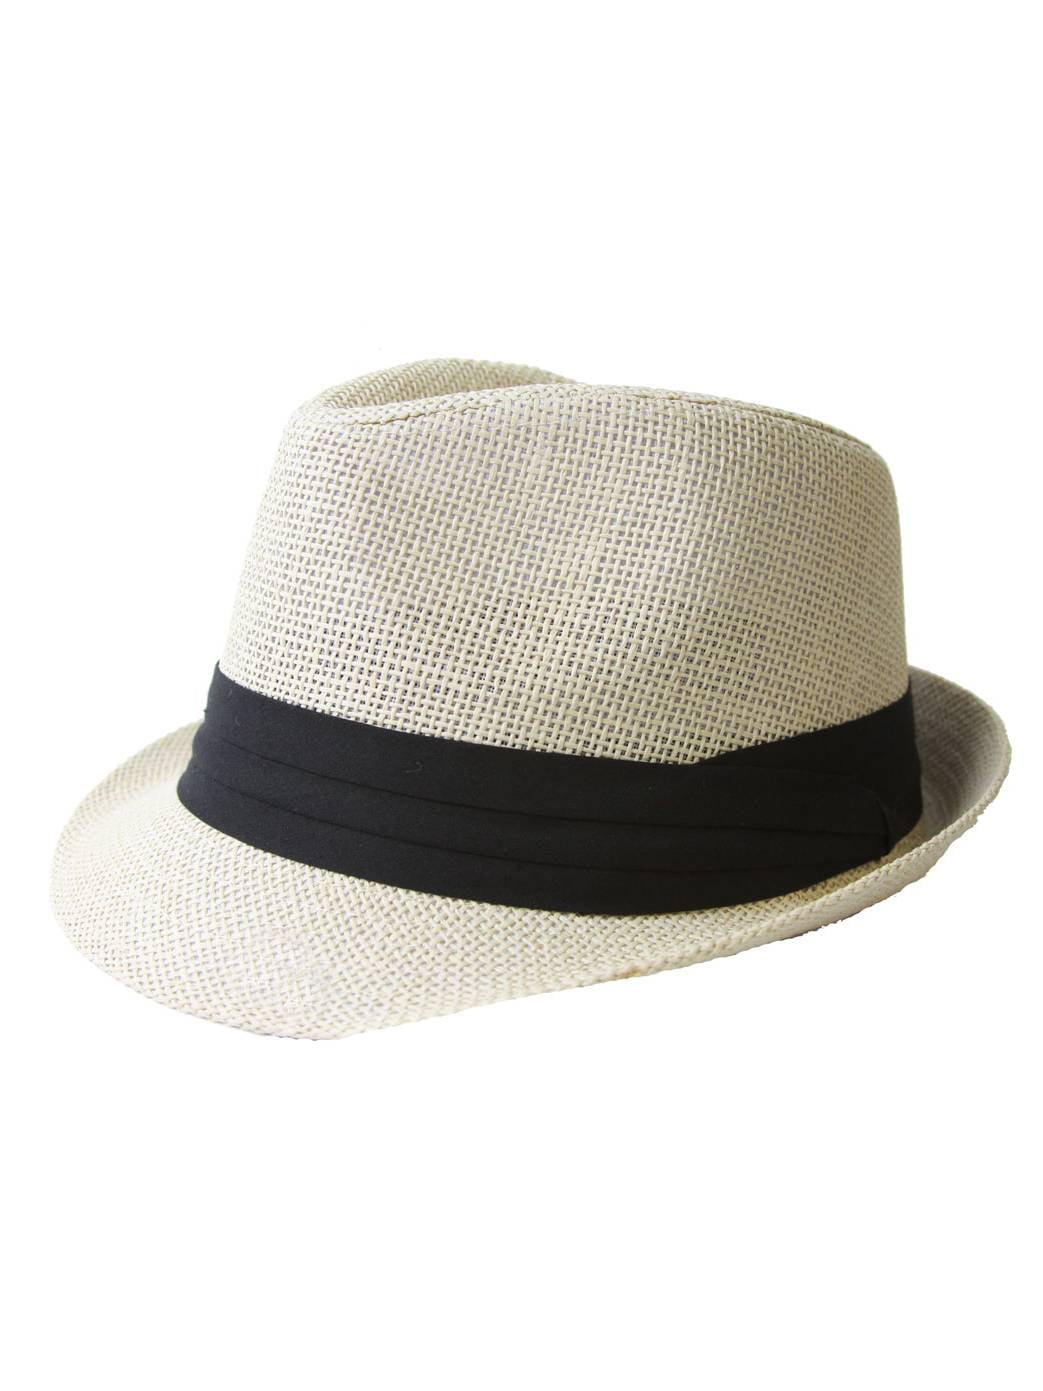 Tweed Classic Cuban Style Fedora Fashion Cap Hat Sky Blue The Hatter Co 